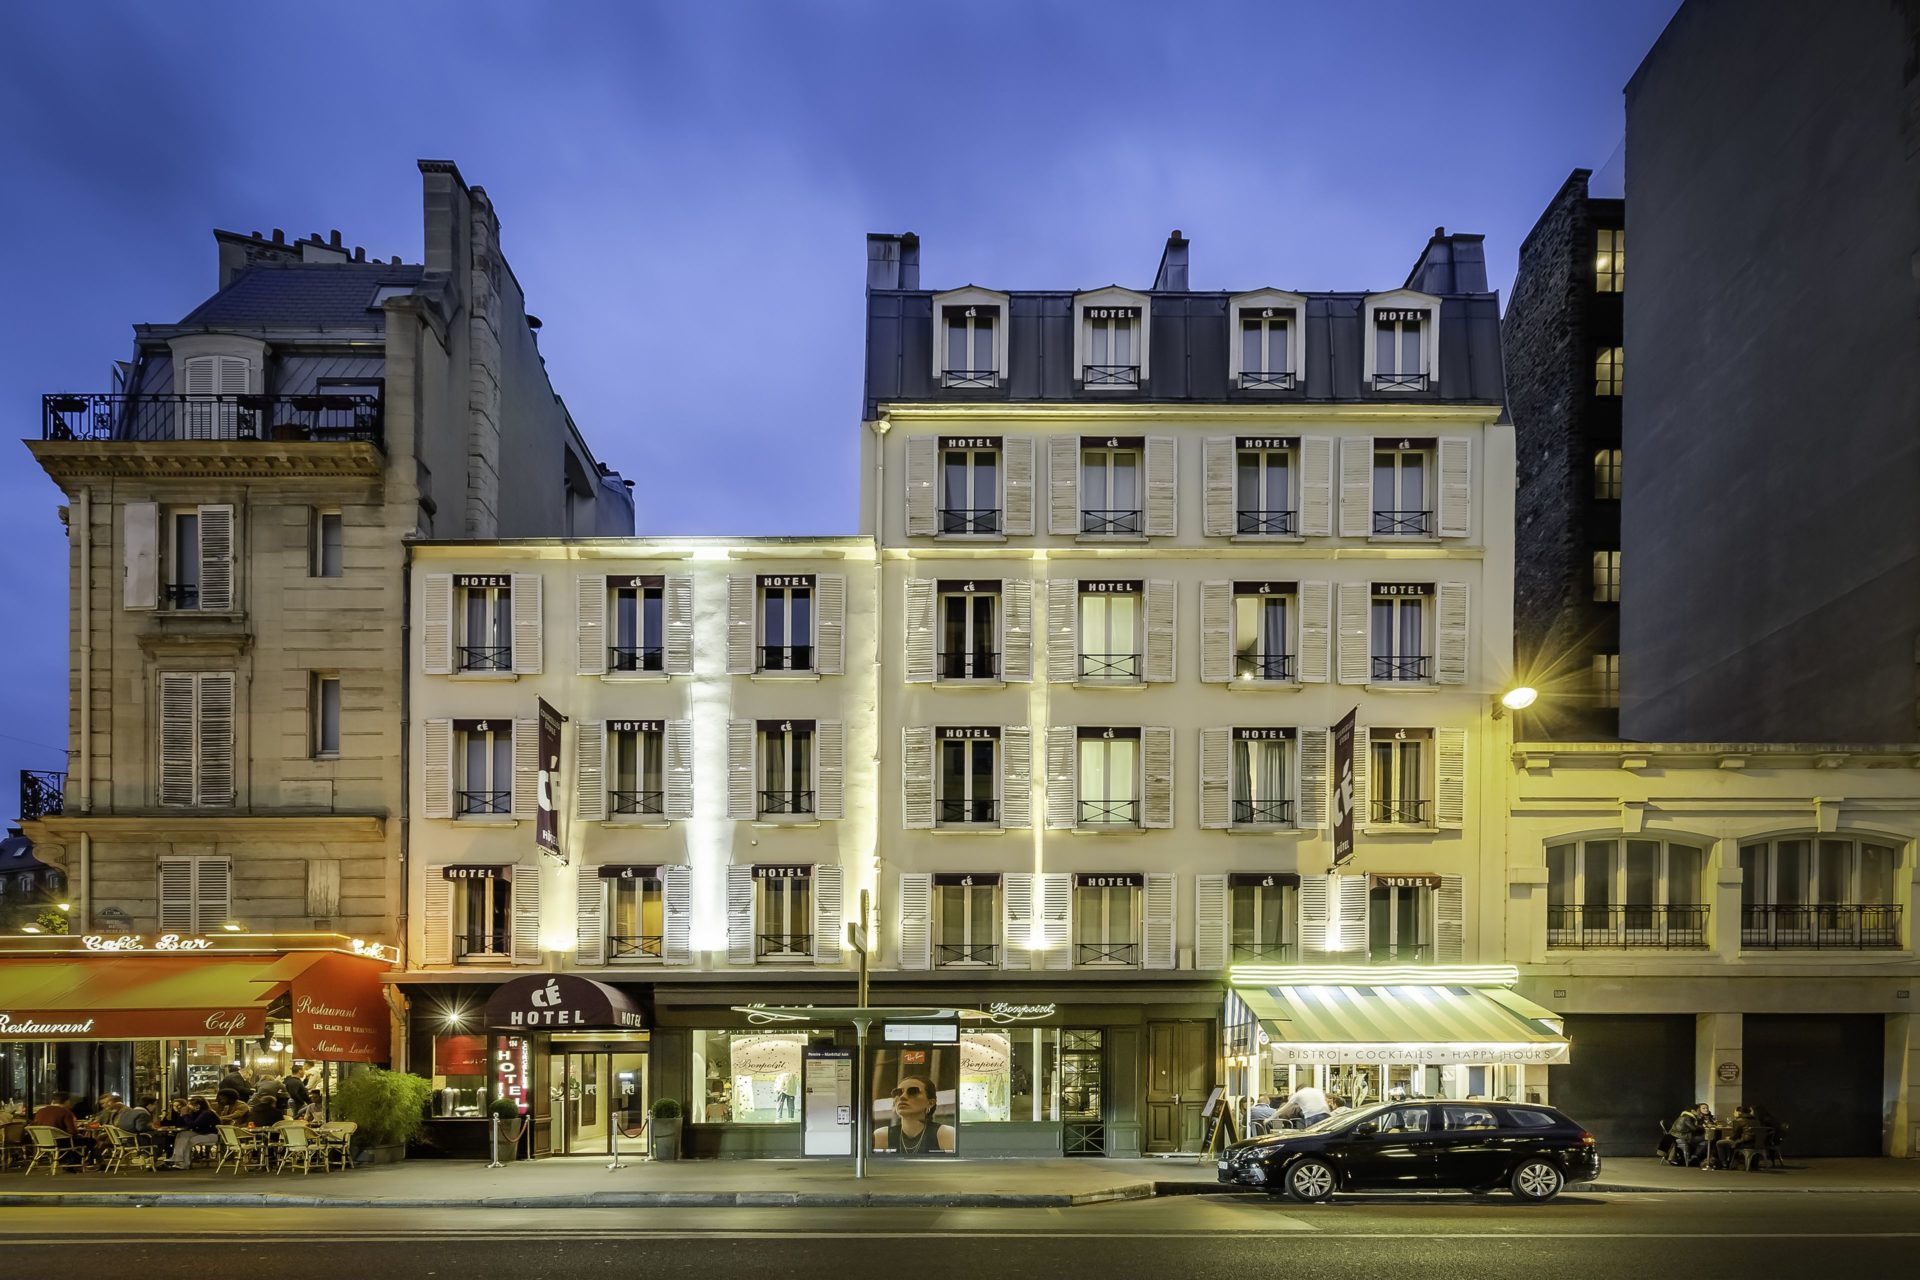 Courcelles Etoile is a gay and lesbian friendly hotel in Paris.